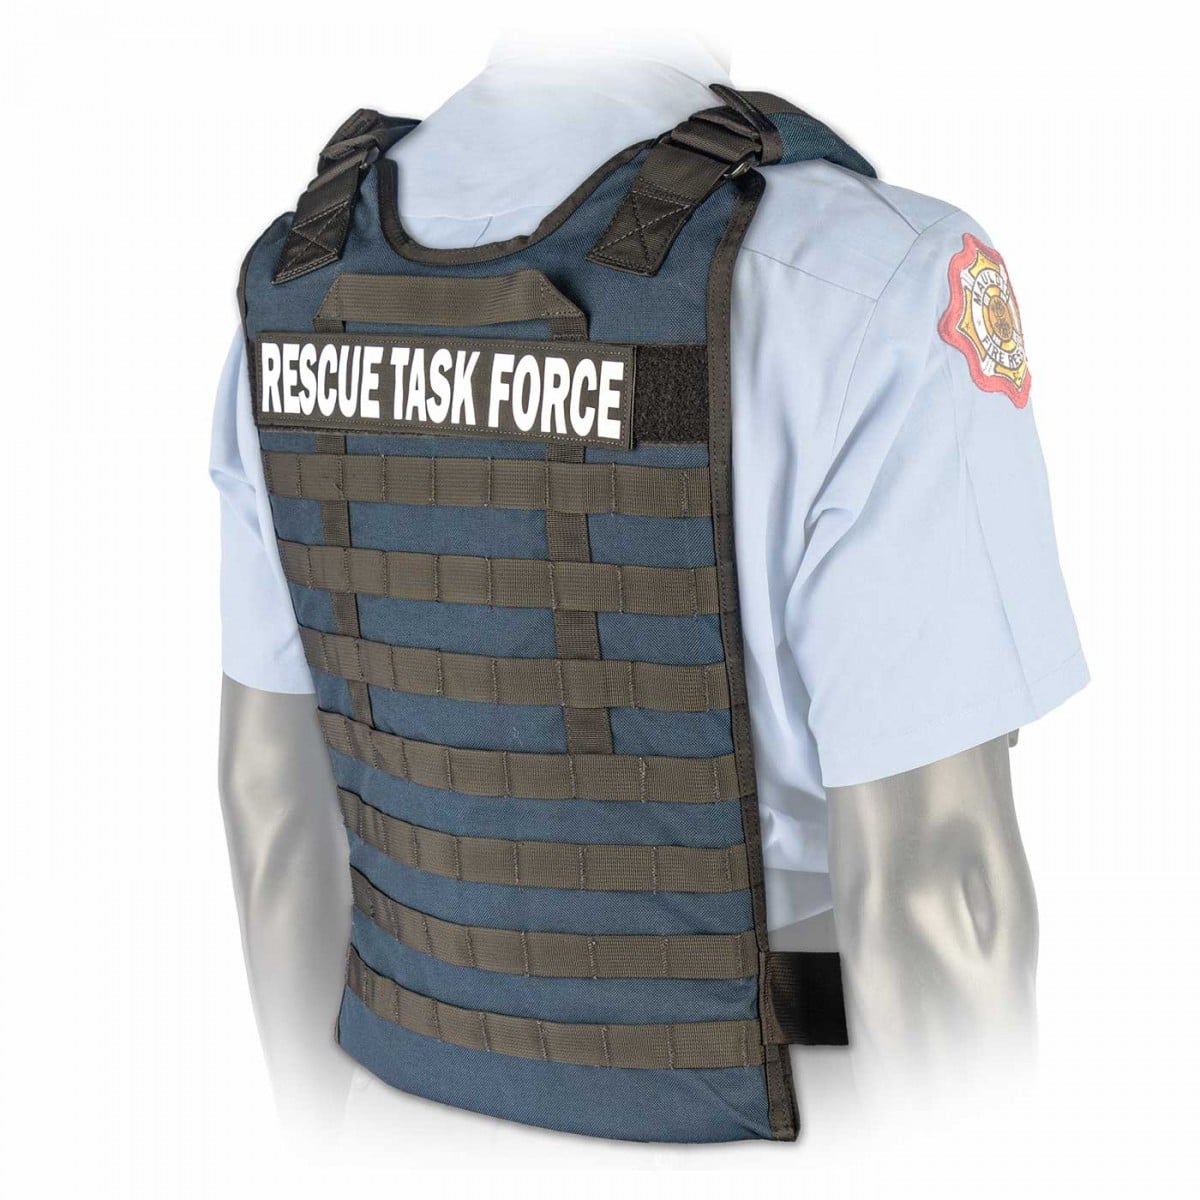 Task Force (Tactical)